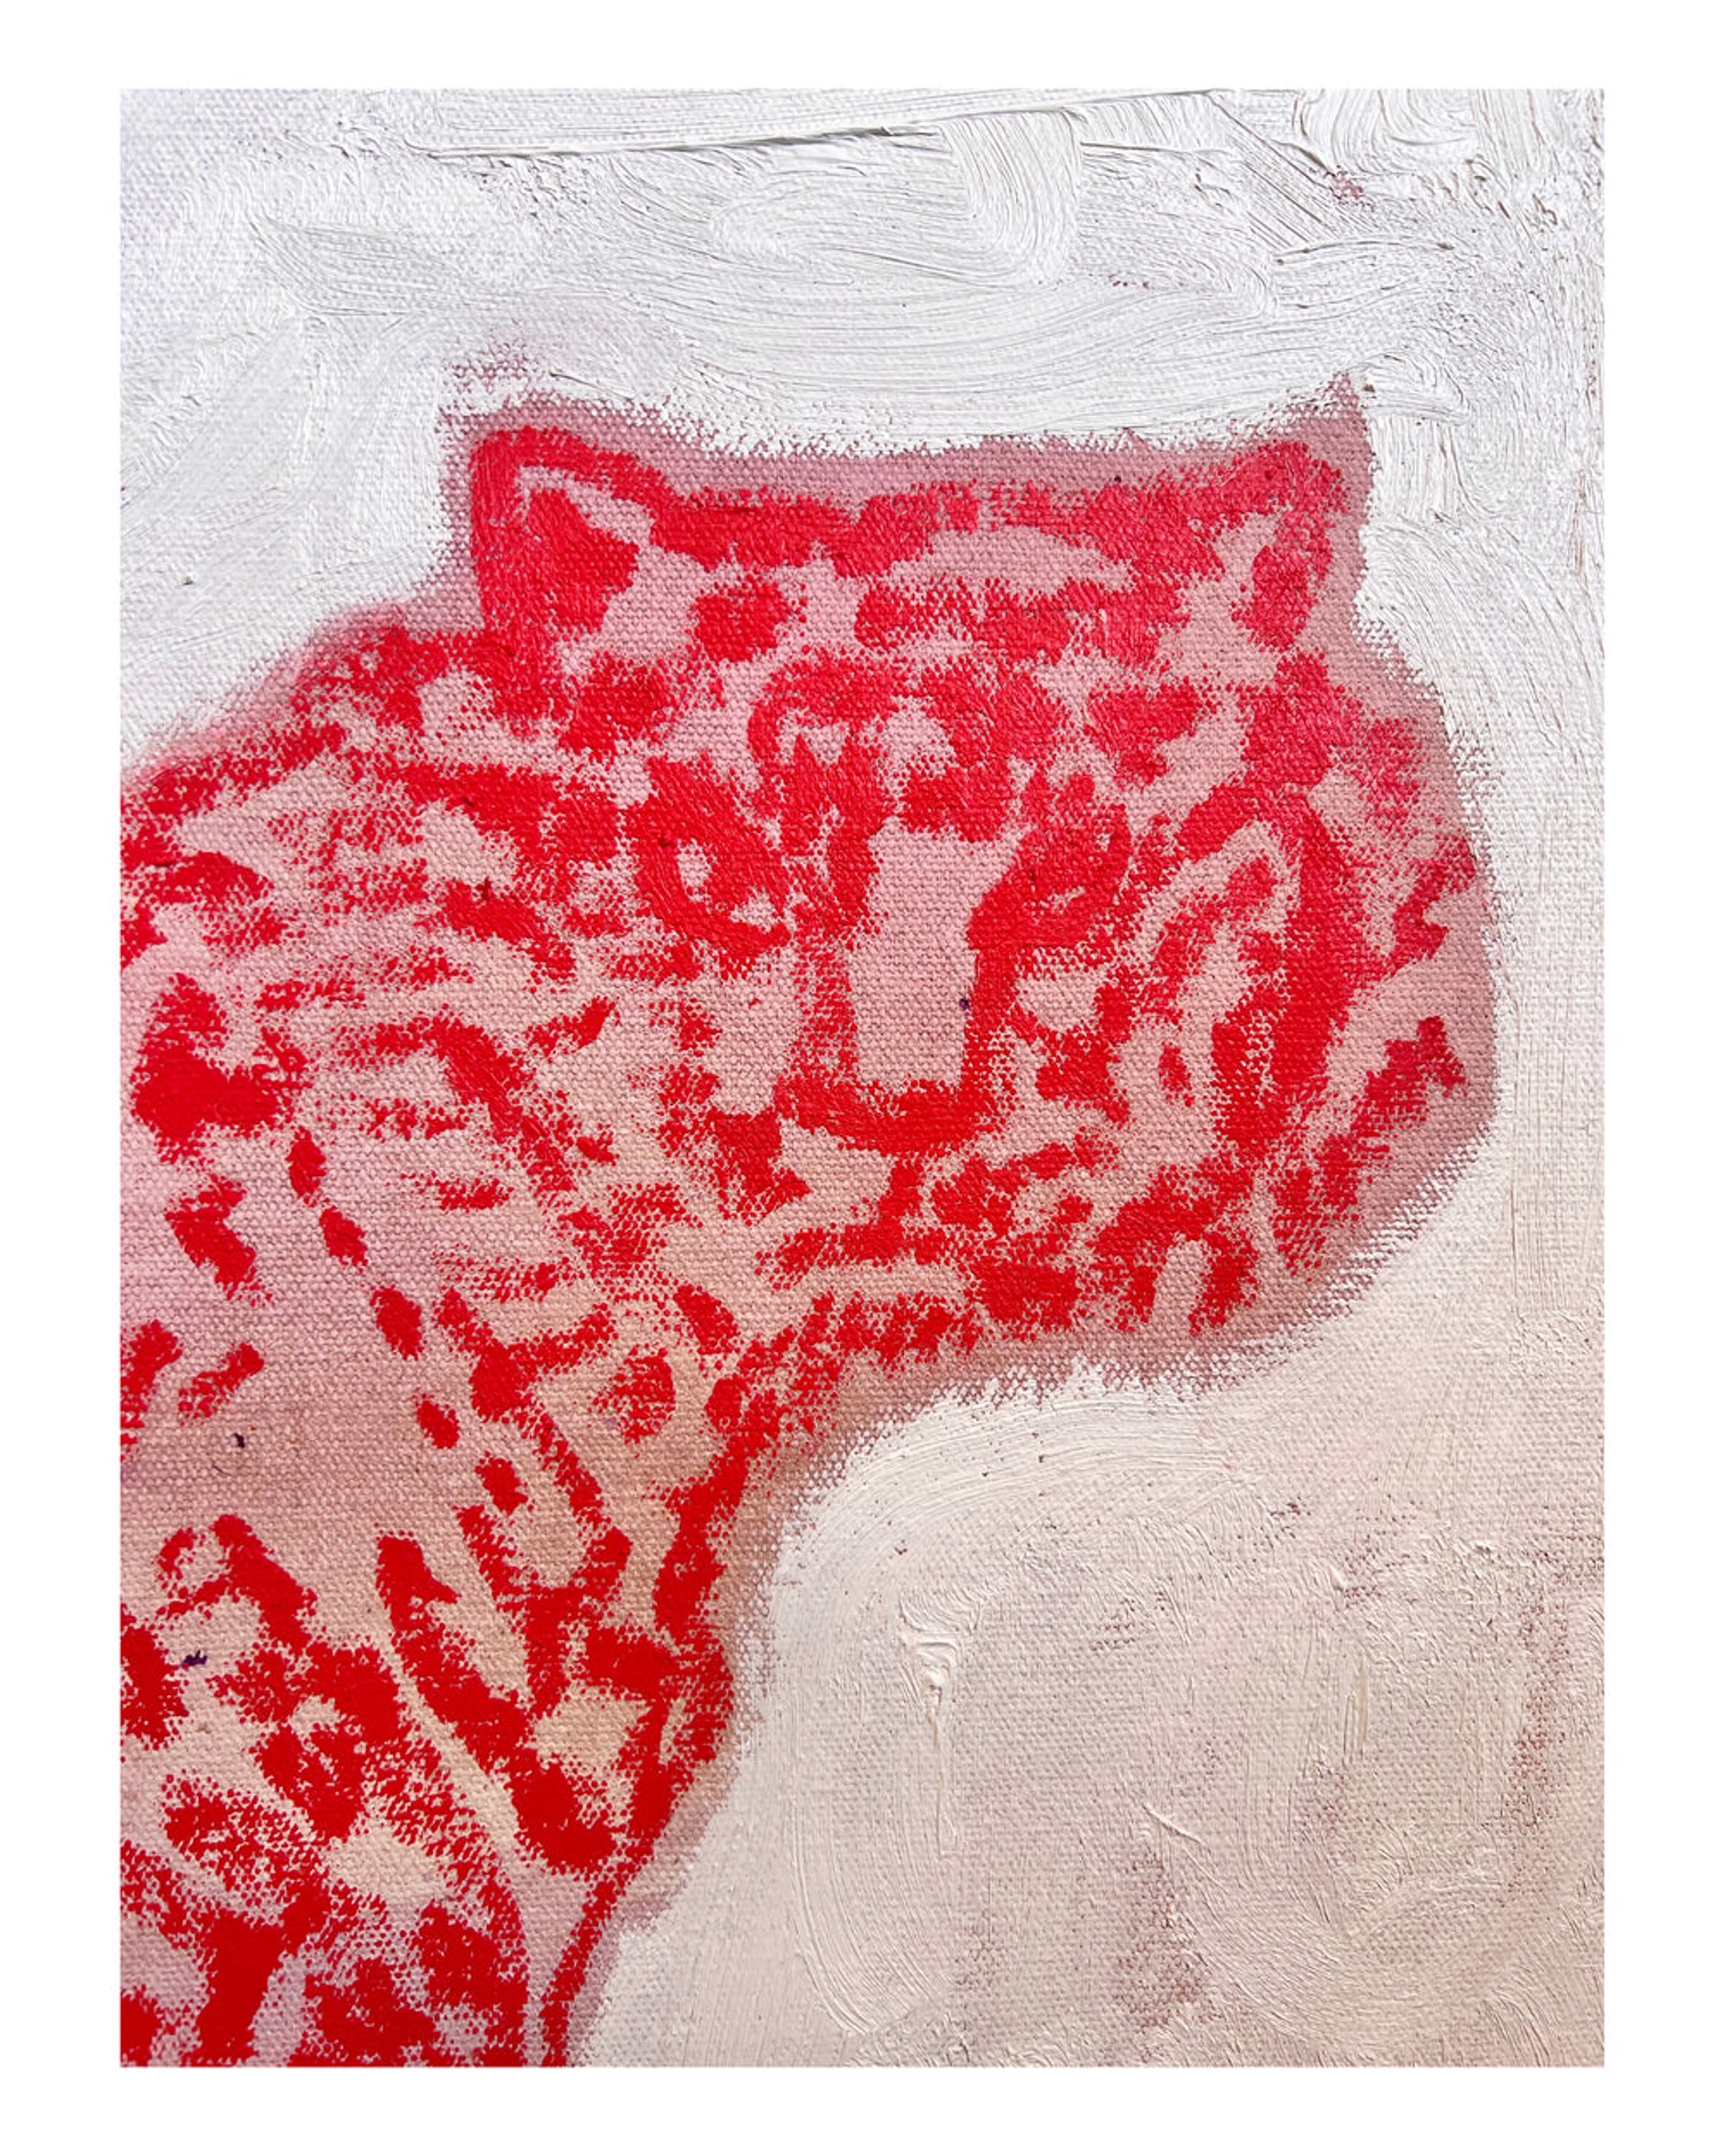 The Tiger, Scarlet by Anne-Louise Ewen